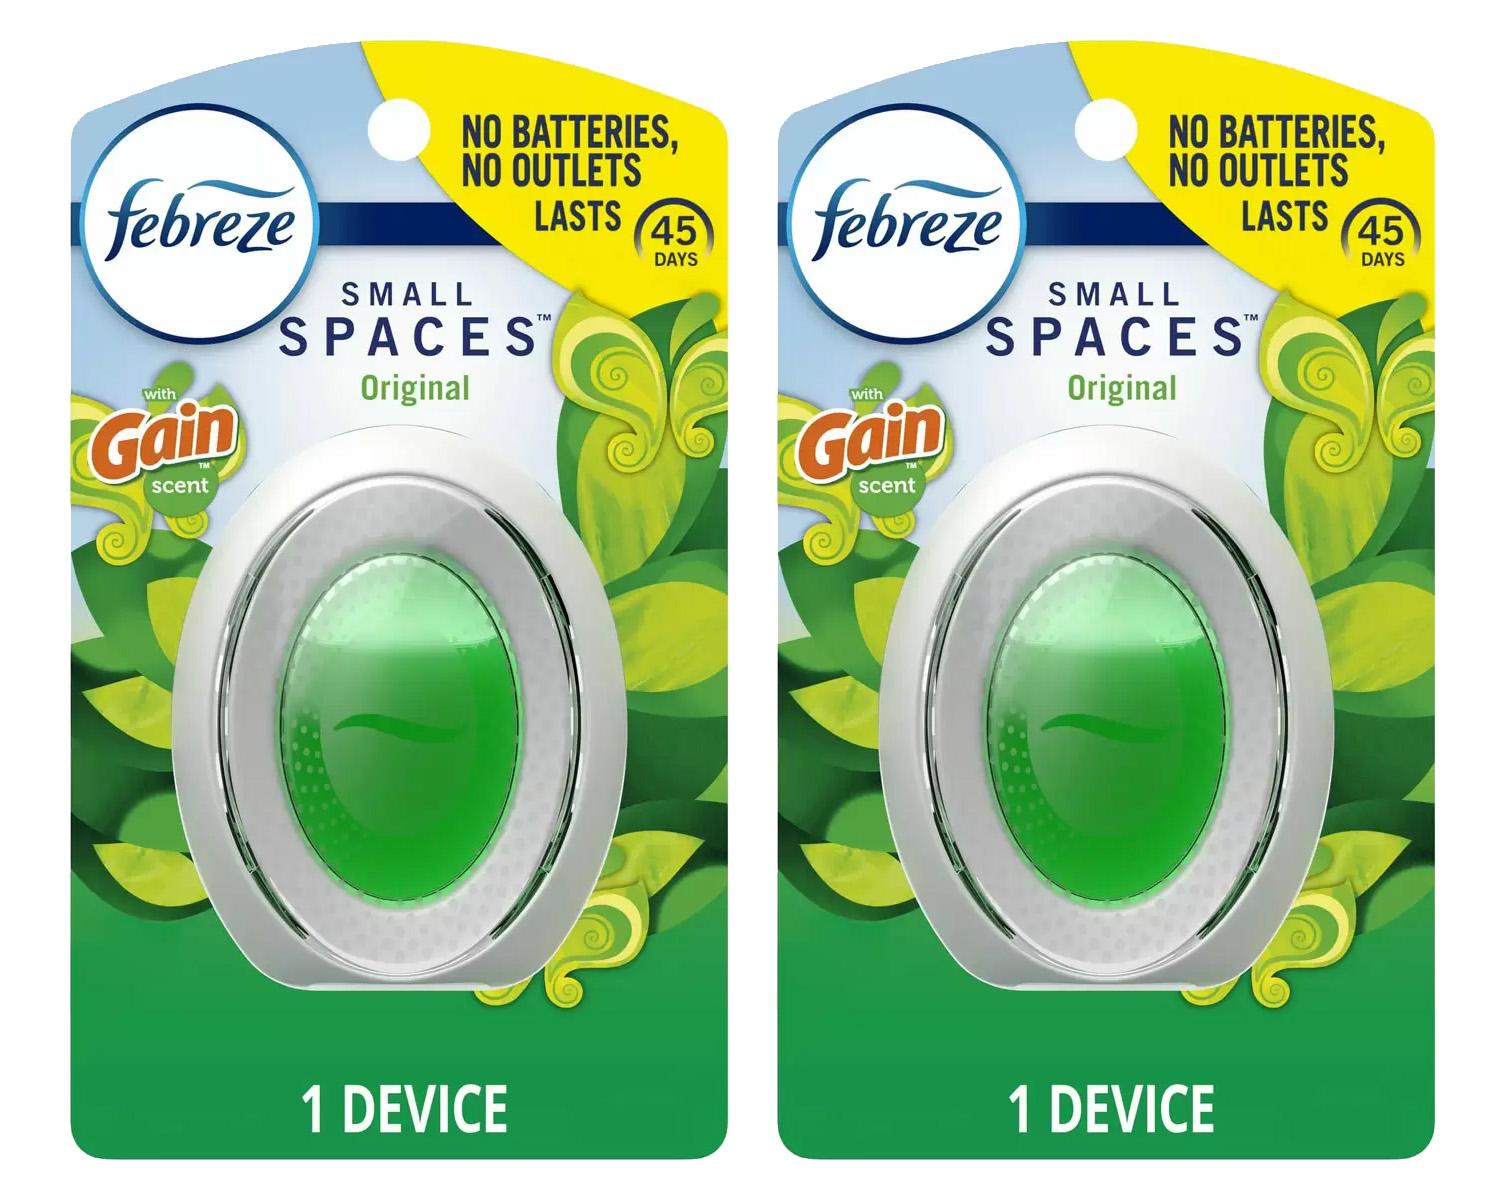 Febreze Small Spaces Air Freshener 2 Pack with $3.30 Walmart Cash for $6.84